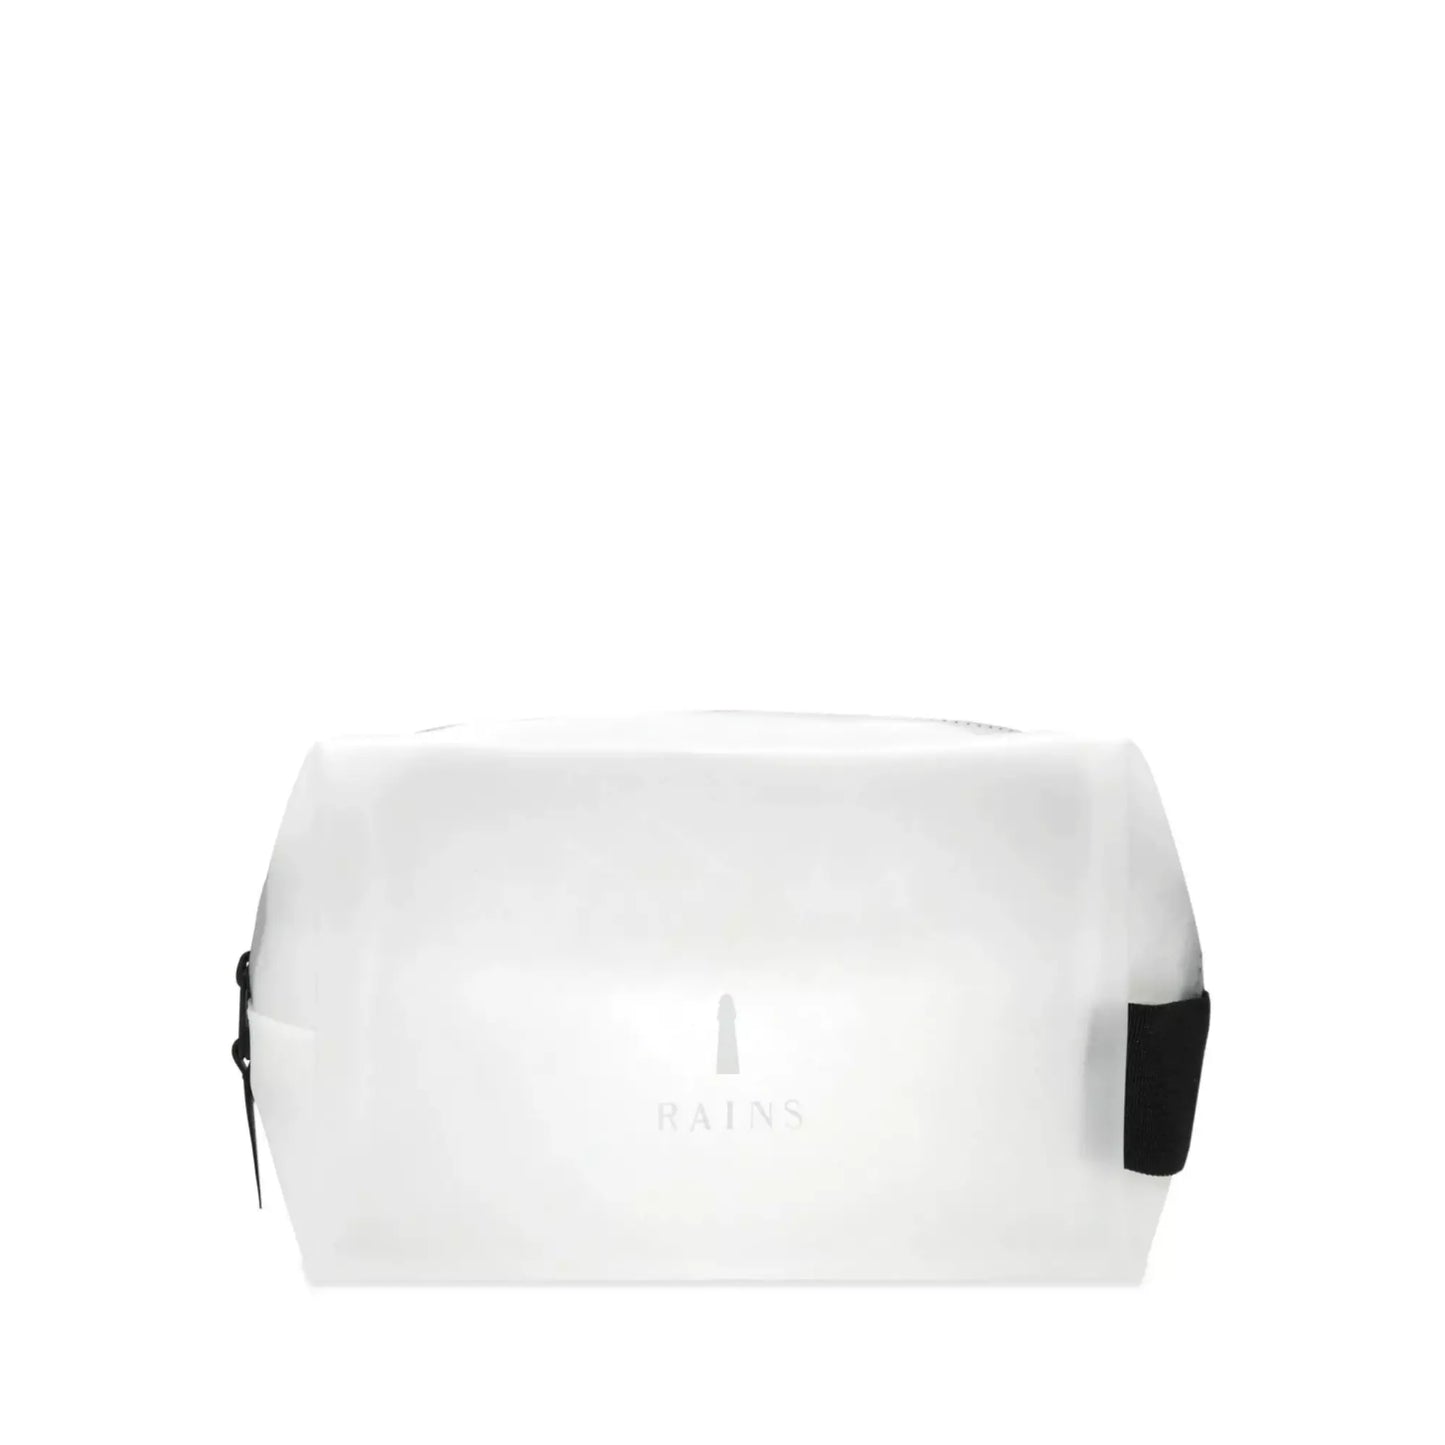 Rains waterproof wash bag foggy white for men and women front view